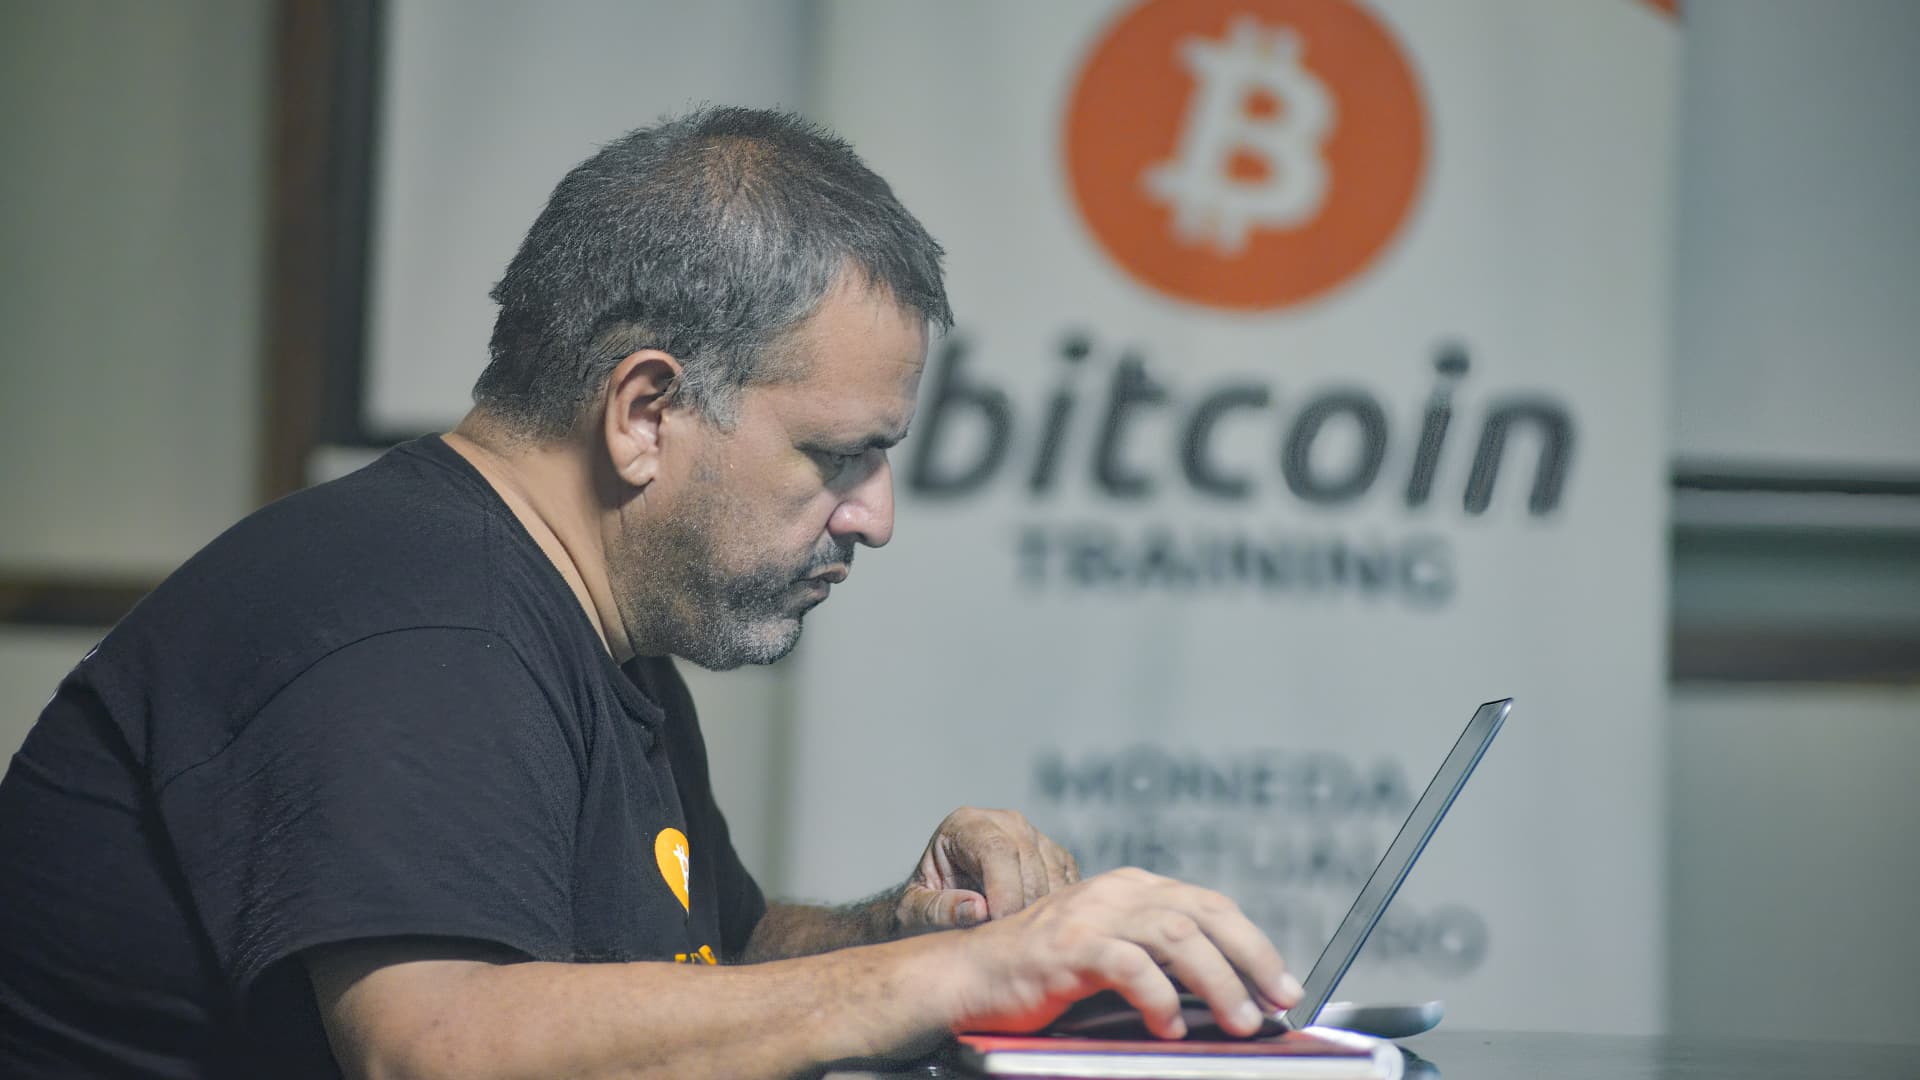 A man works on a laptop at a Bitcoin training facility. Salvadoran President Nayib Bukele has announced that he will propose a law to the Congress, where his party controls a majority, for Bitcoin to become legal tender.